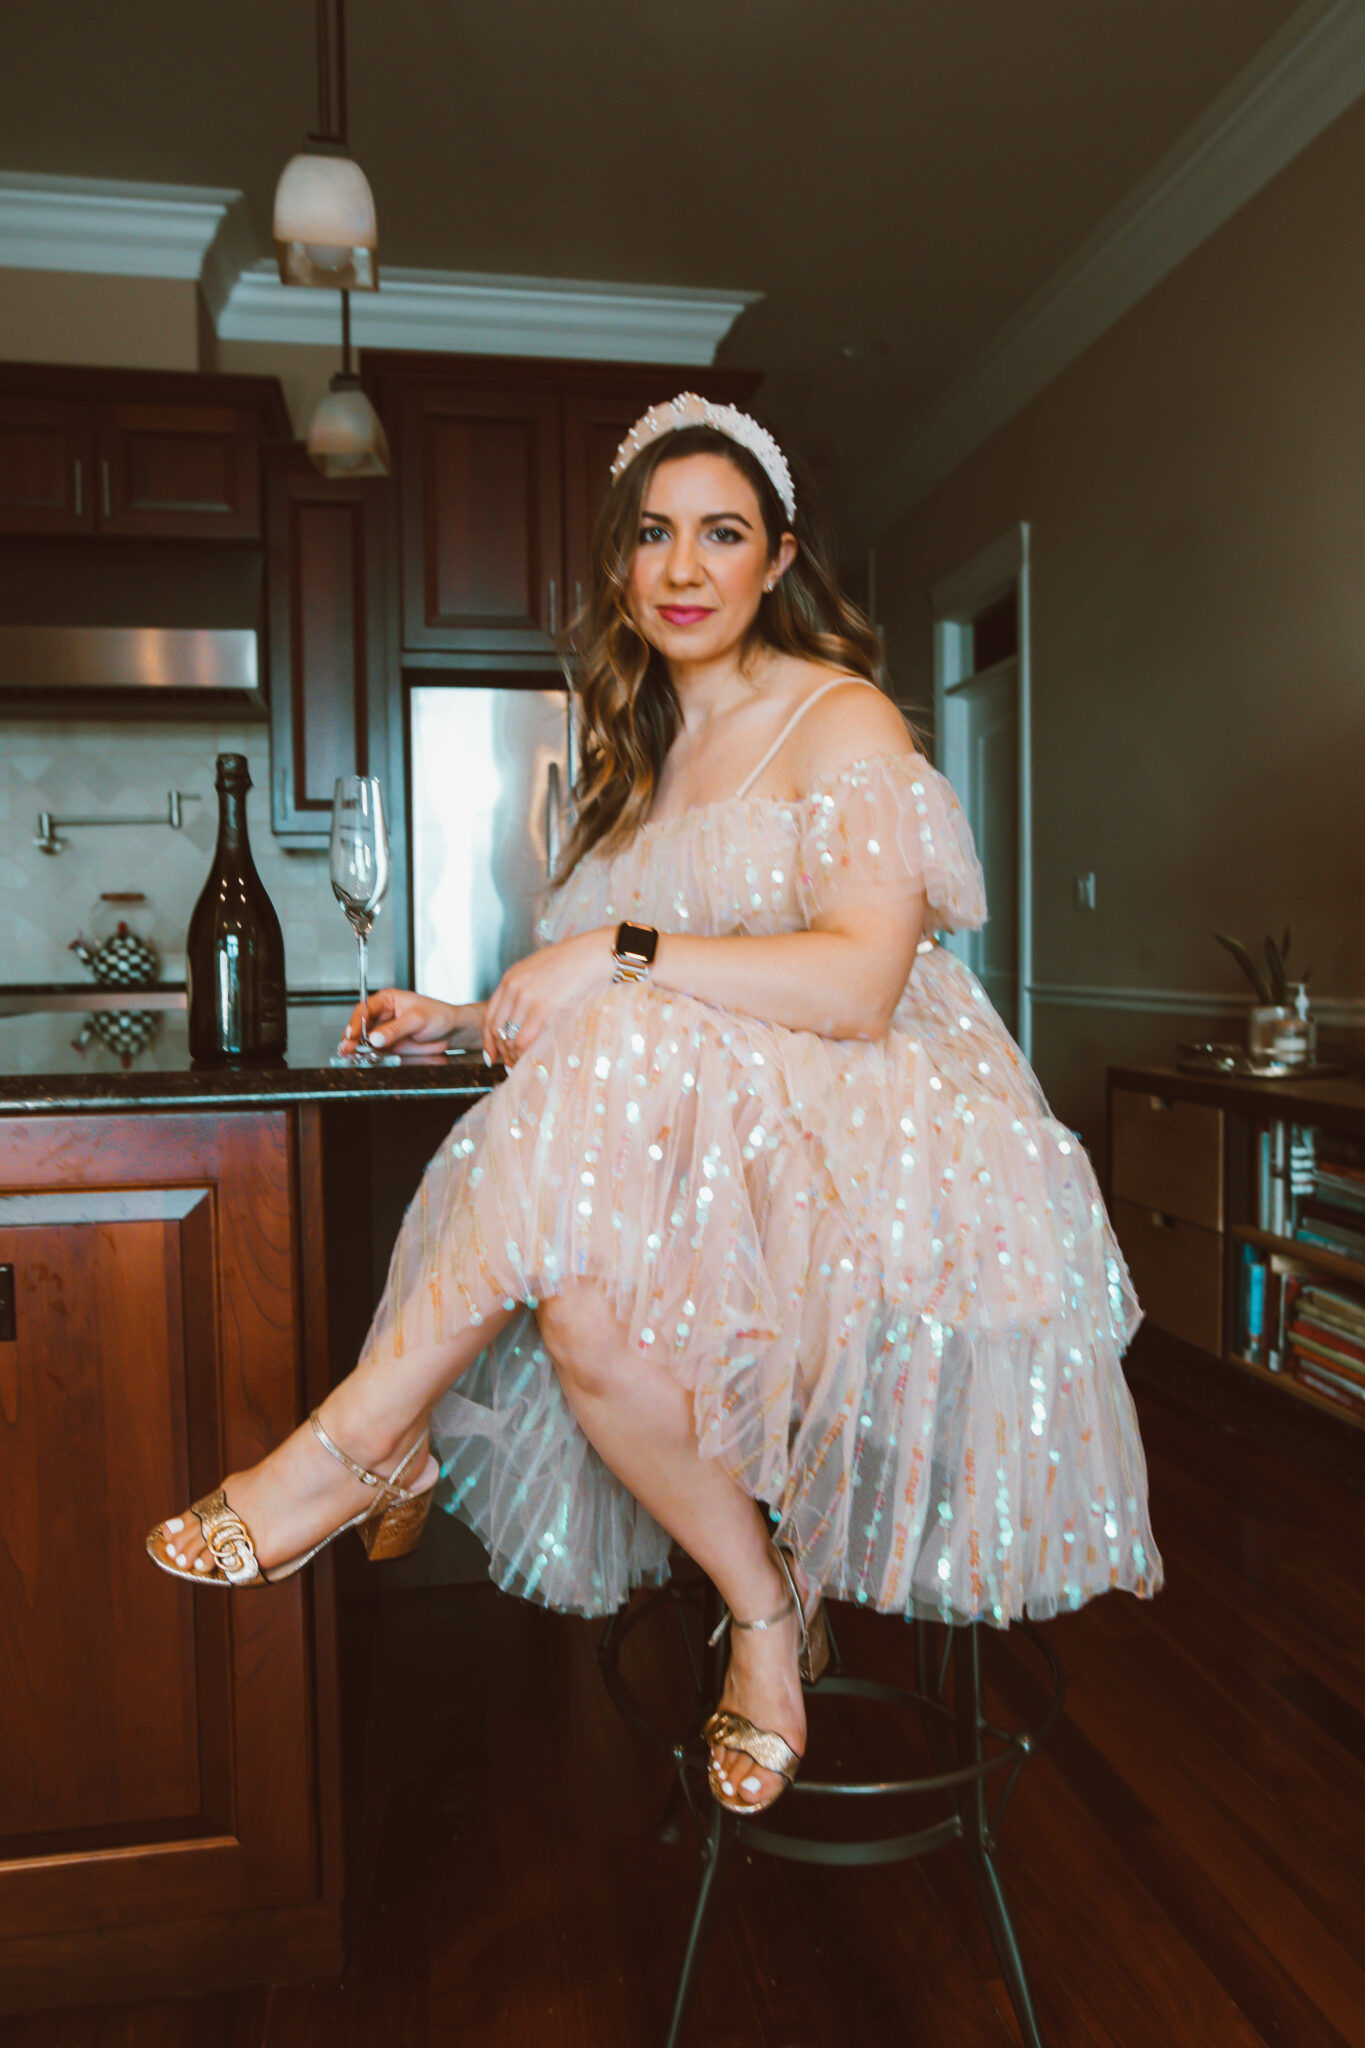 Party Dress by popular Chicago fashion blog, Glass of Glam: image of a woman holding a champagne flute and wearing a sequin party dress, pearl embellished knot headband, and Gucci block heel sandals.